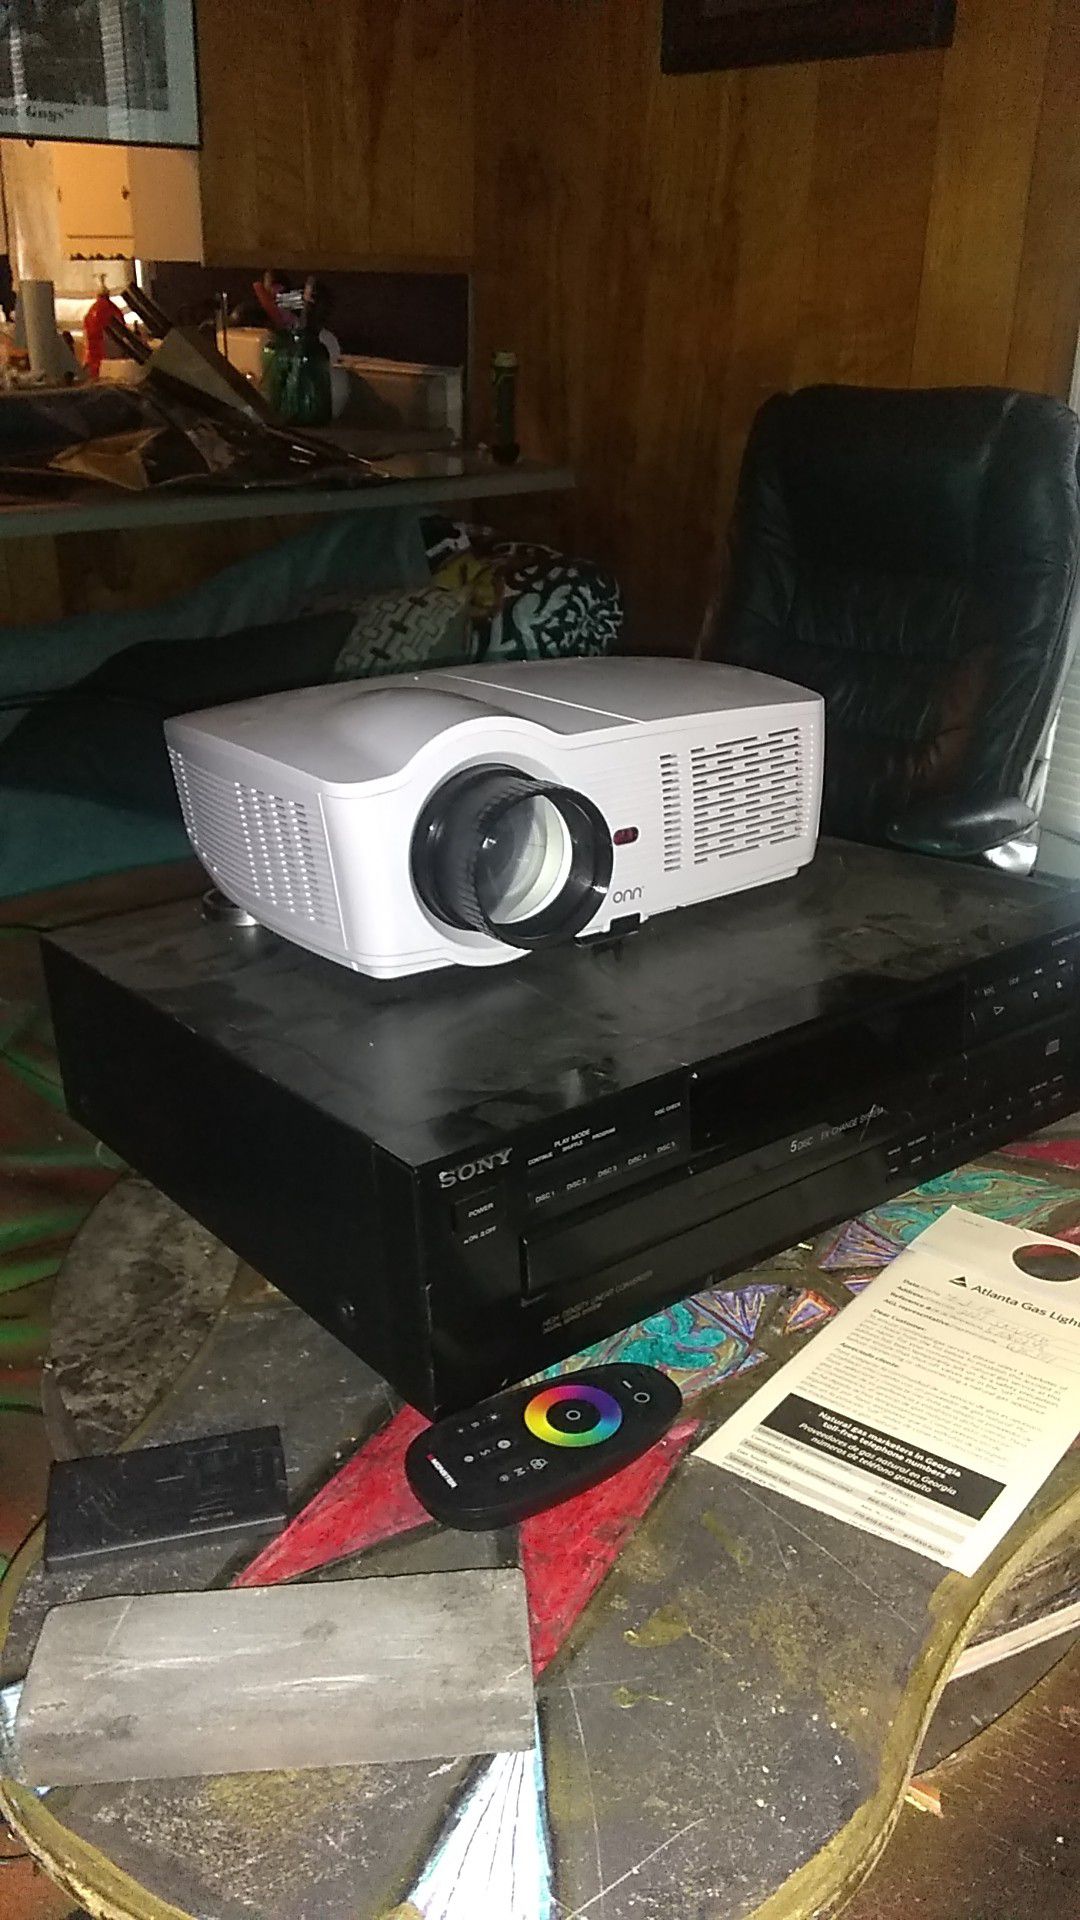 Onn 720p Projector with Roku Stick